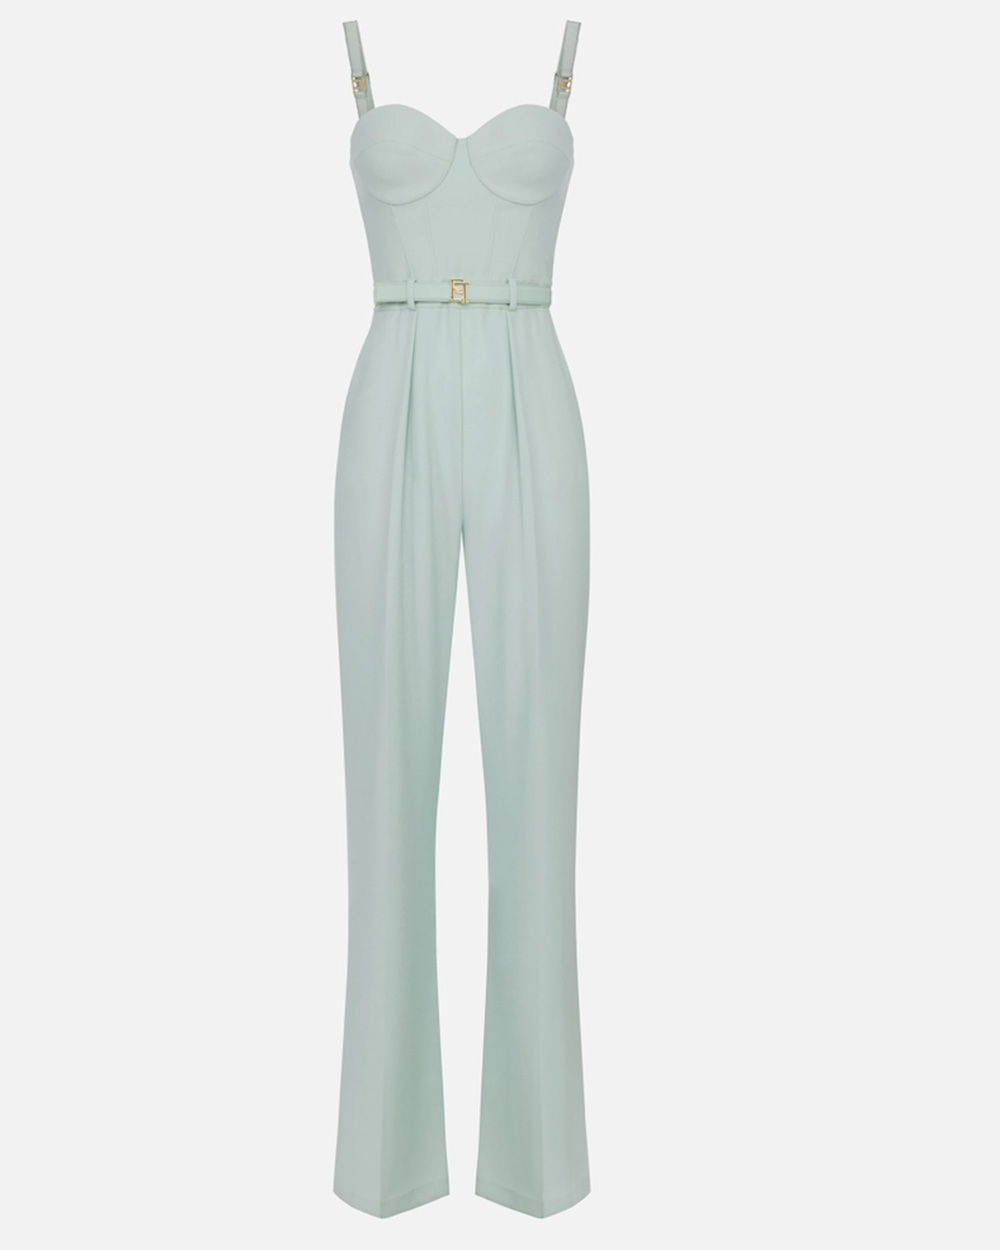 Jumpsuit in crepe fabric with bustier top | Eponymo